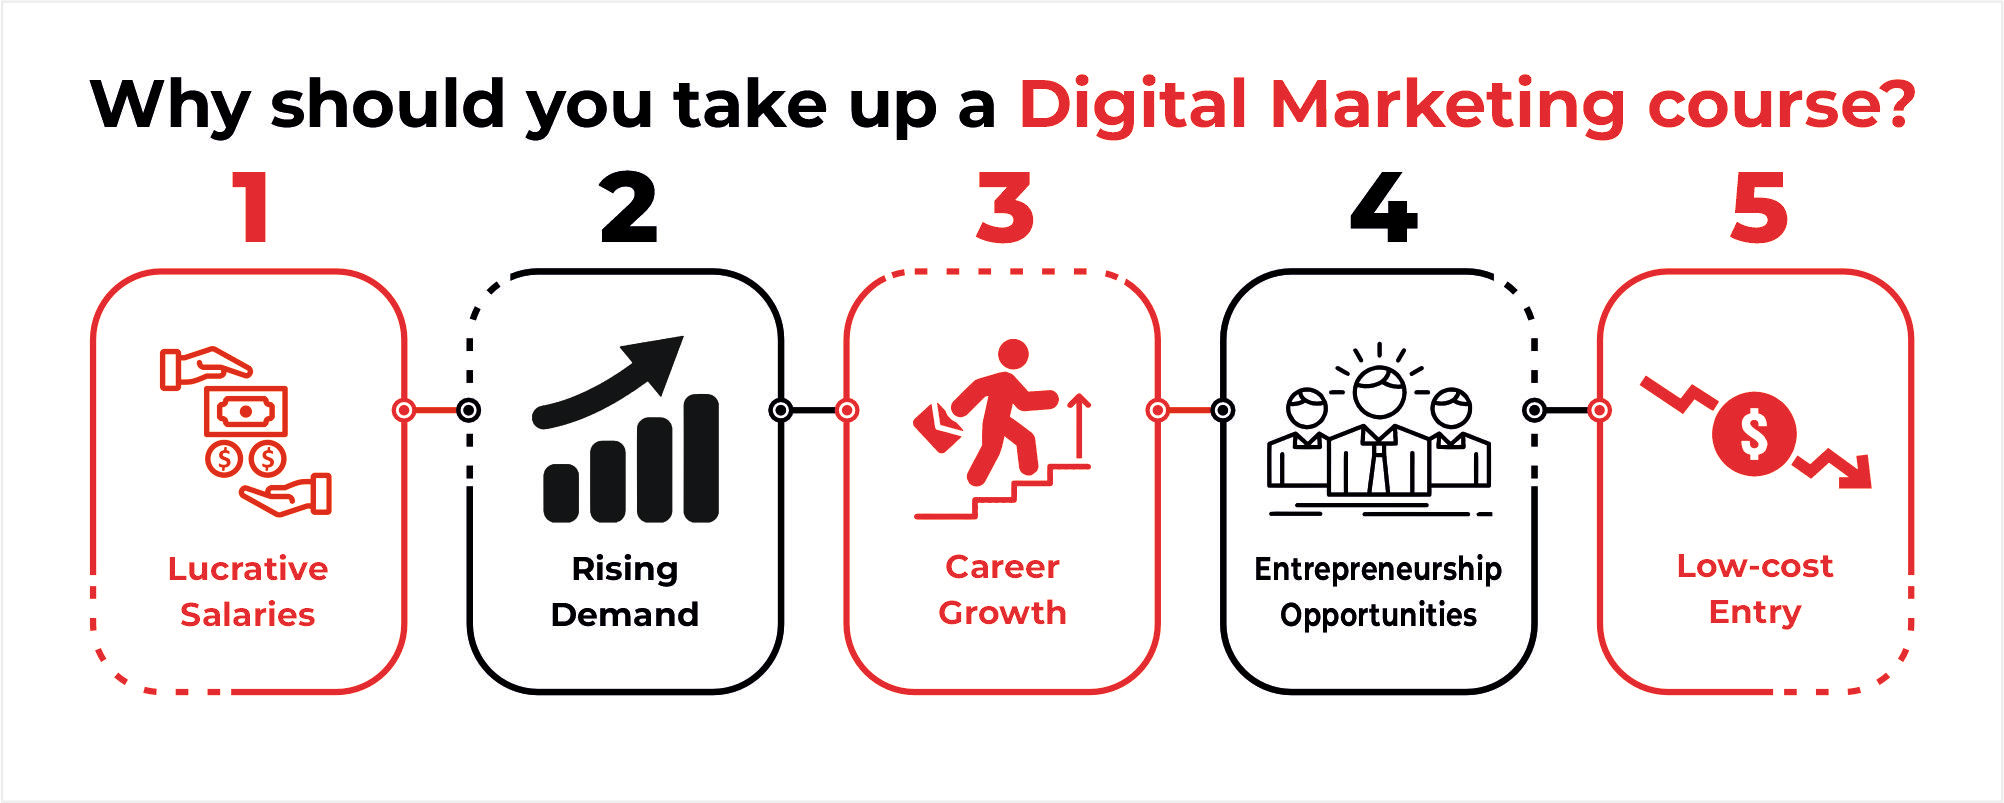 Why should you take up a digital marketing course